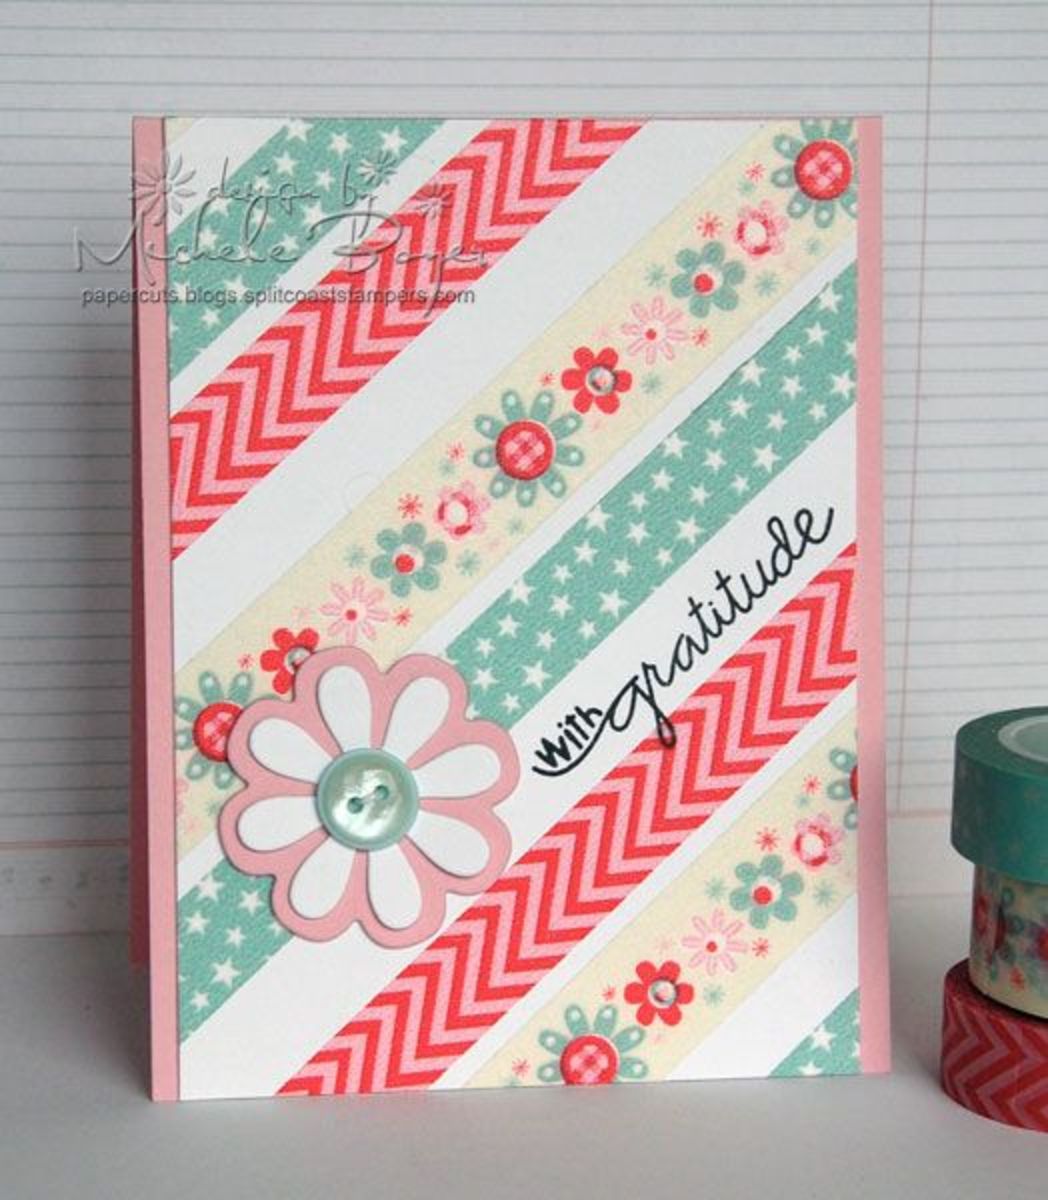 Colorful washi tape with a cute pattern. for decorating greeting